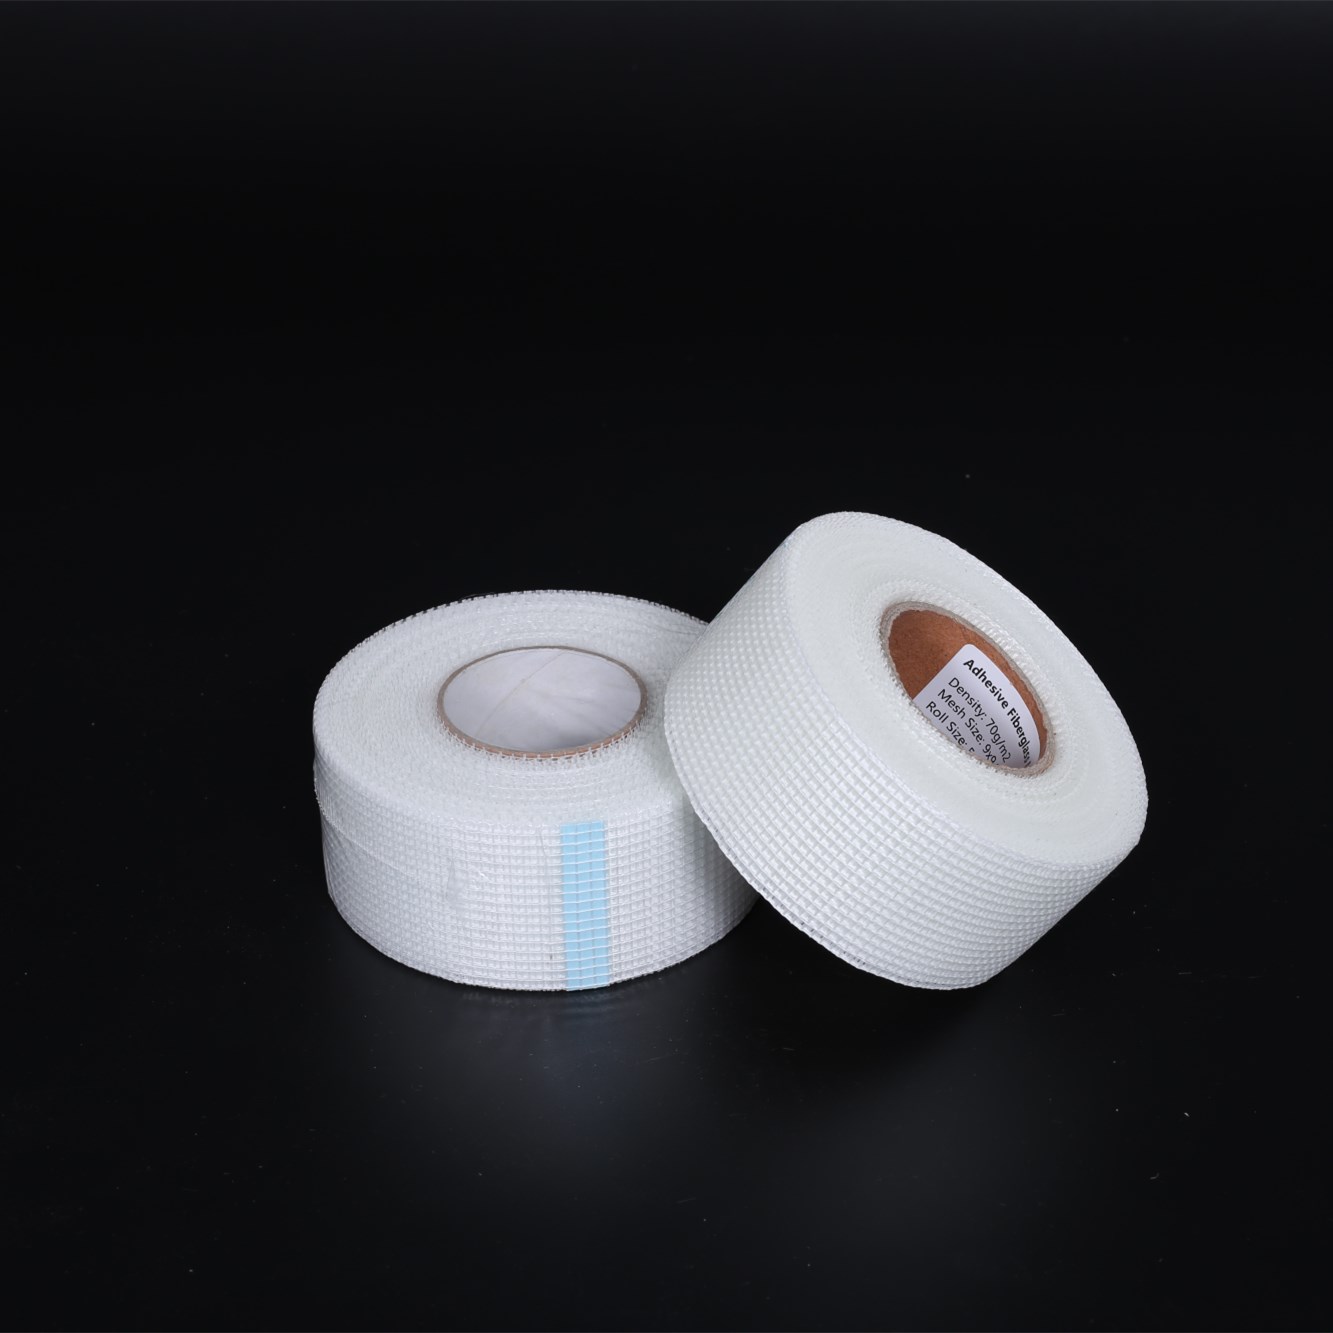 Best 60g/m2 fiberglass mesh reinforces self-adhesive tape for building construction joint tape Manufacturer and Factory |